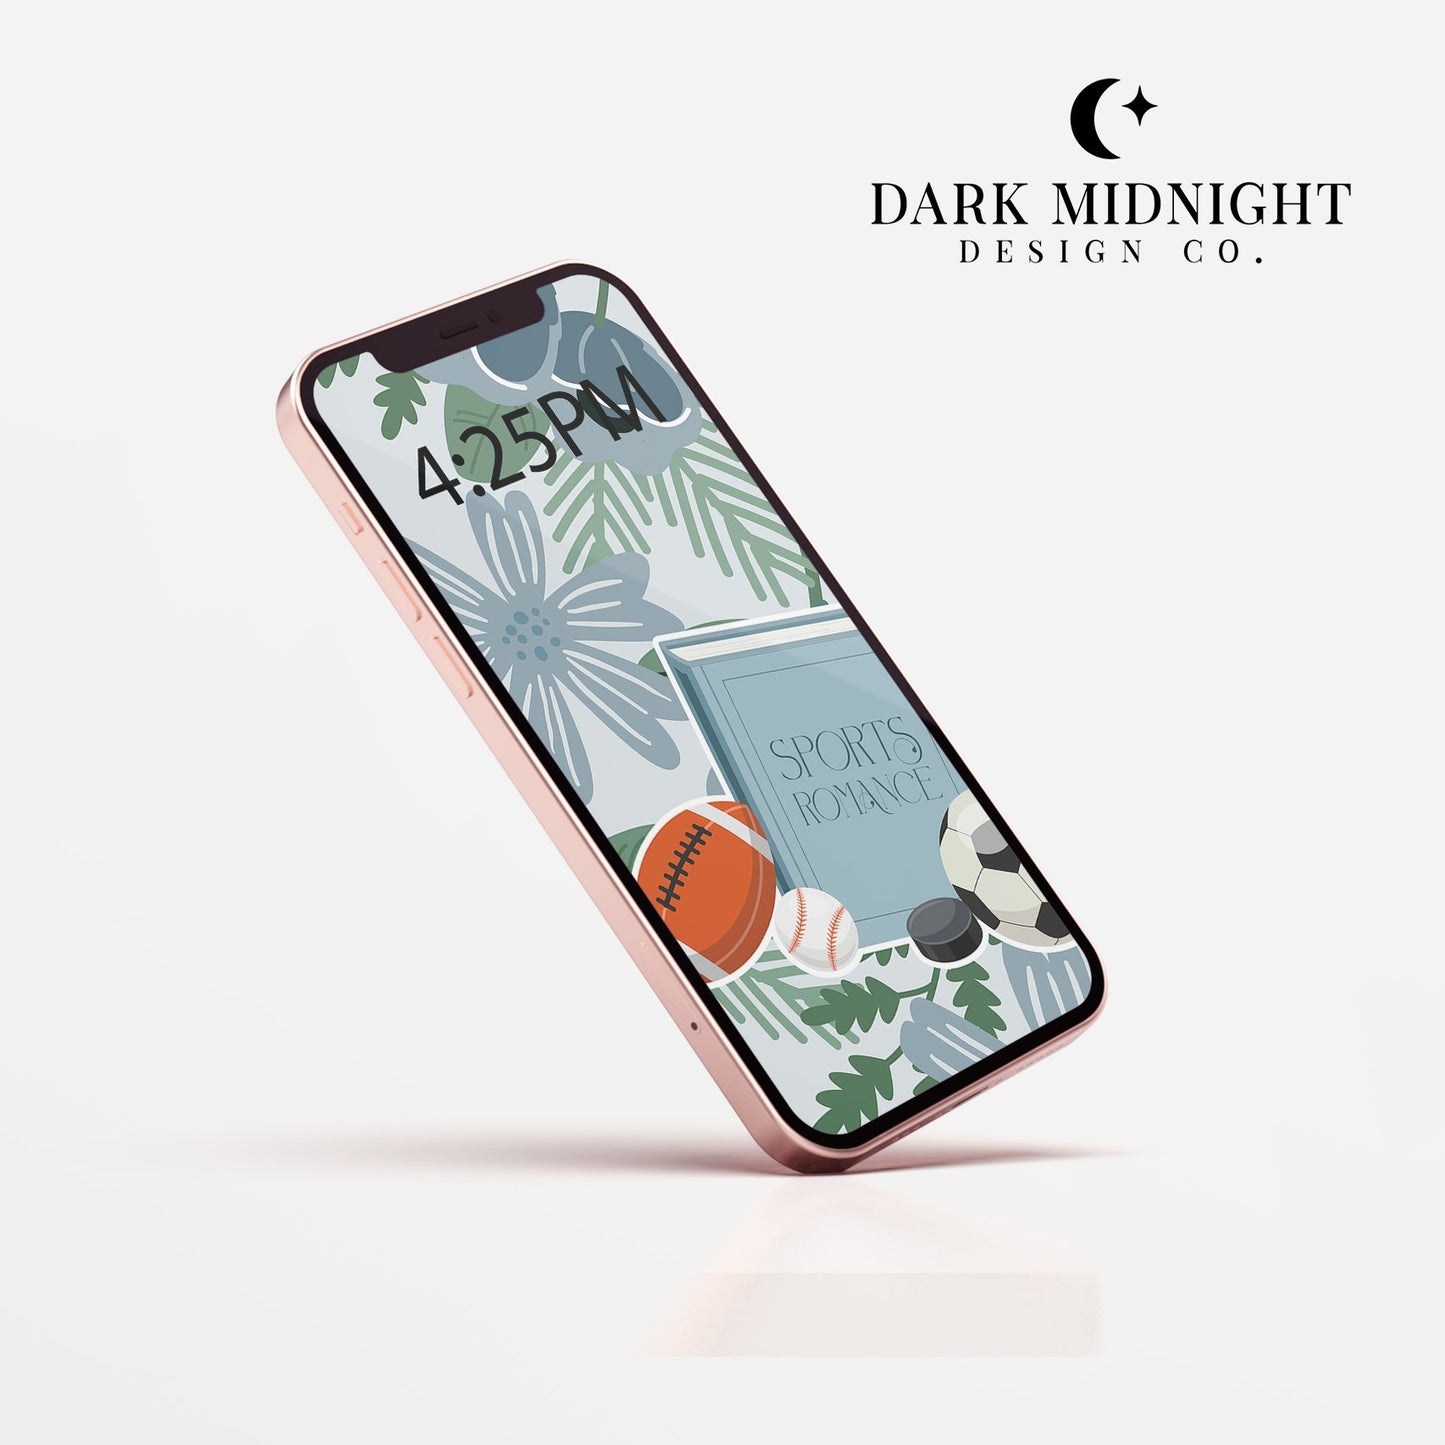 Sports Romance Blue Bookish Tropes and Florals Phone Wallpaper - Dark Midnight Design Co